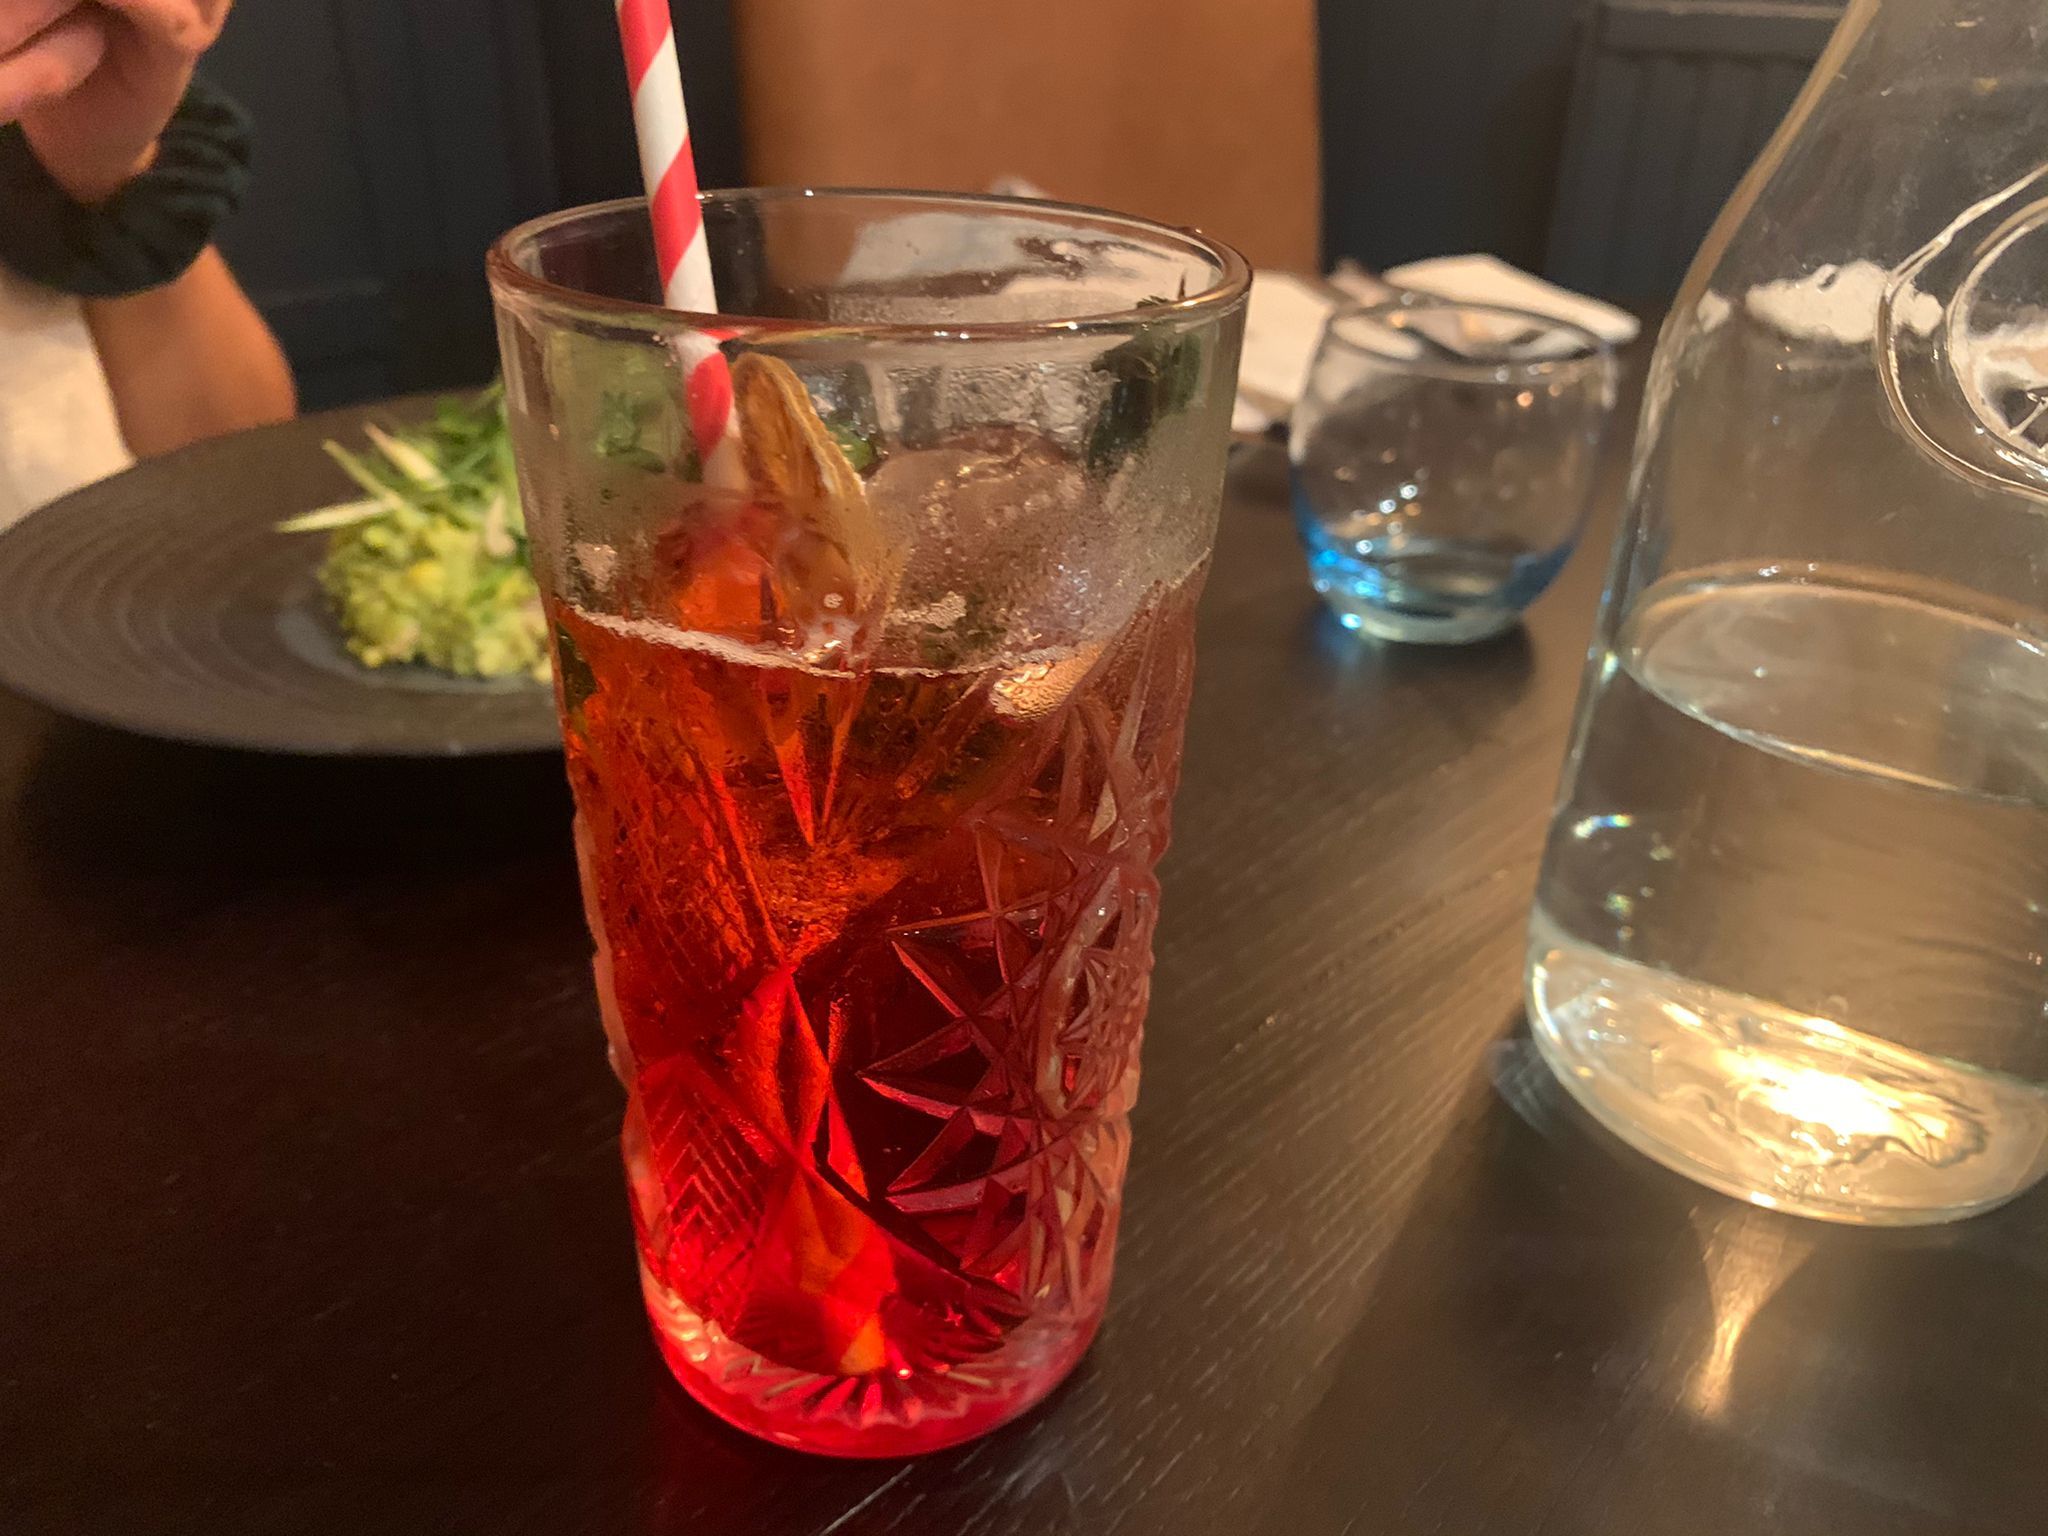 The non-alcoholic cocktail